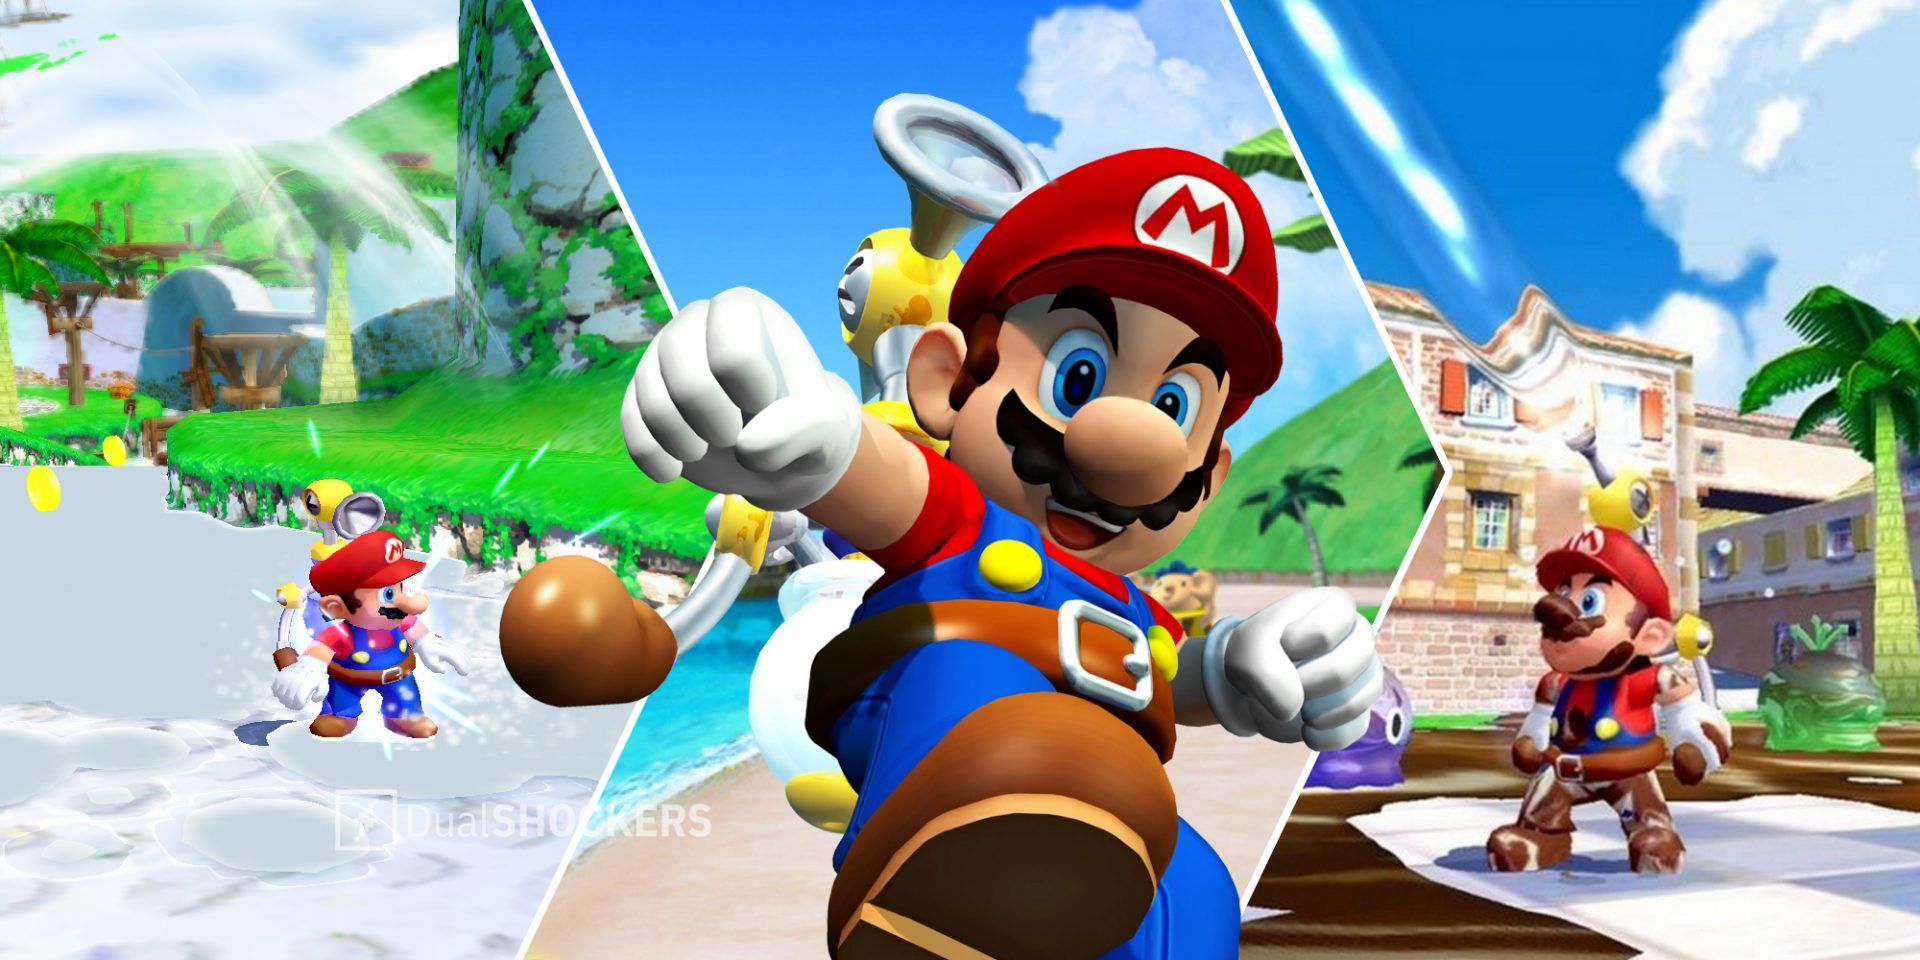 Super Mario Sunshine Mario standing in a stream on left, Mario promo image in middle, Mario covered in paint on right